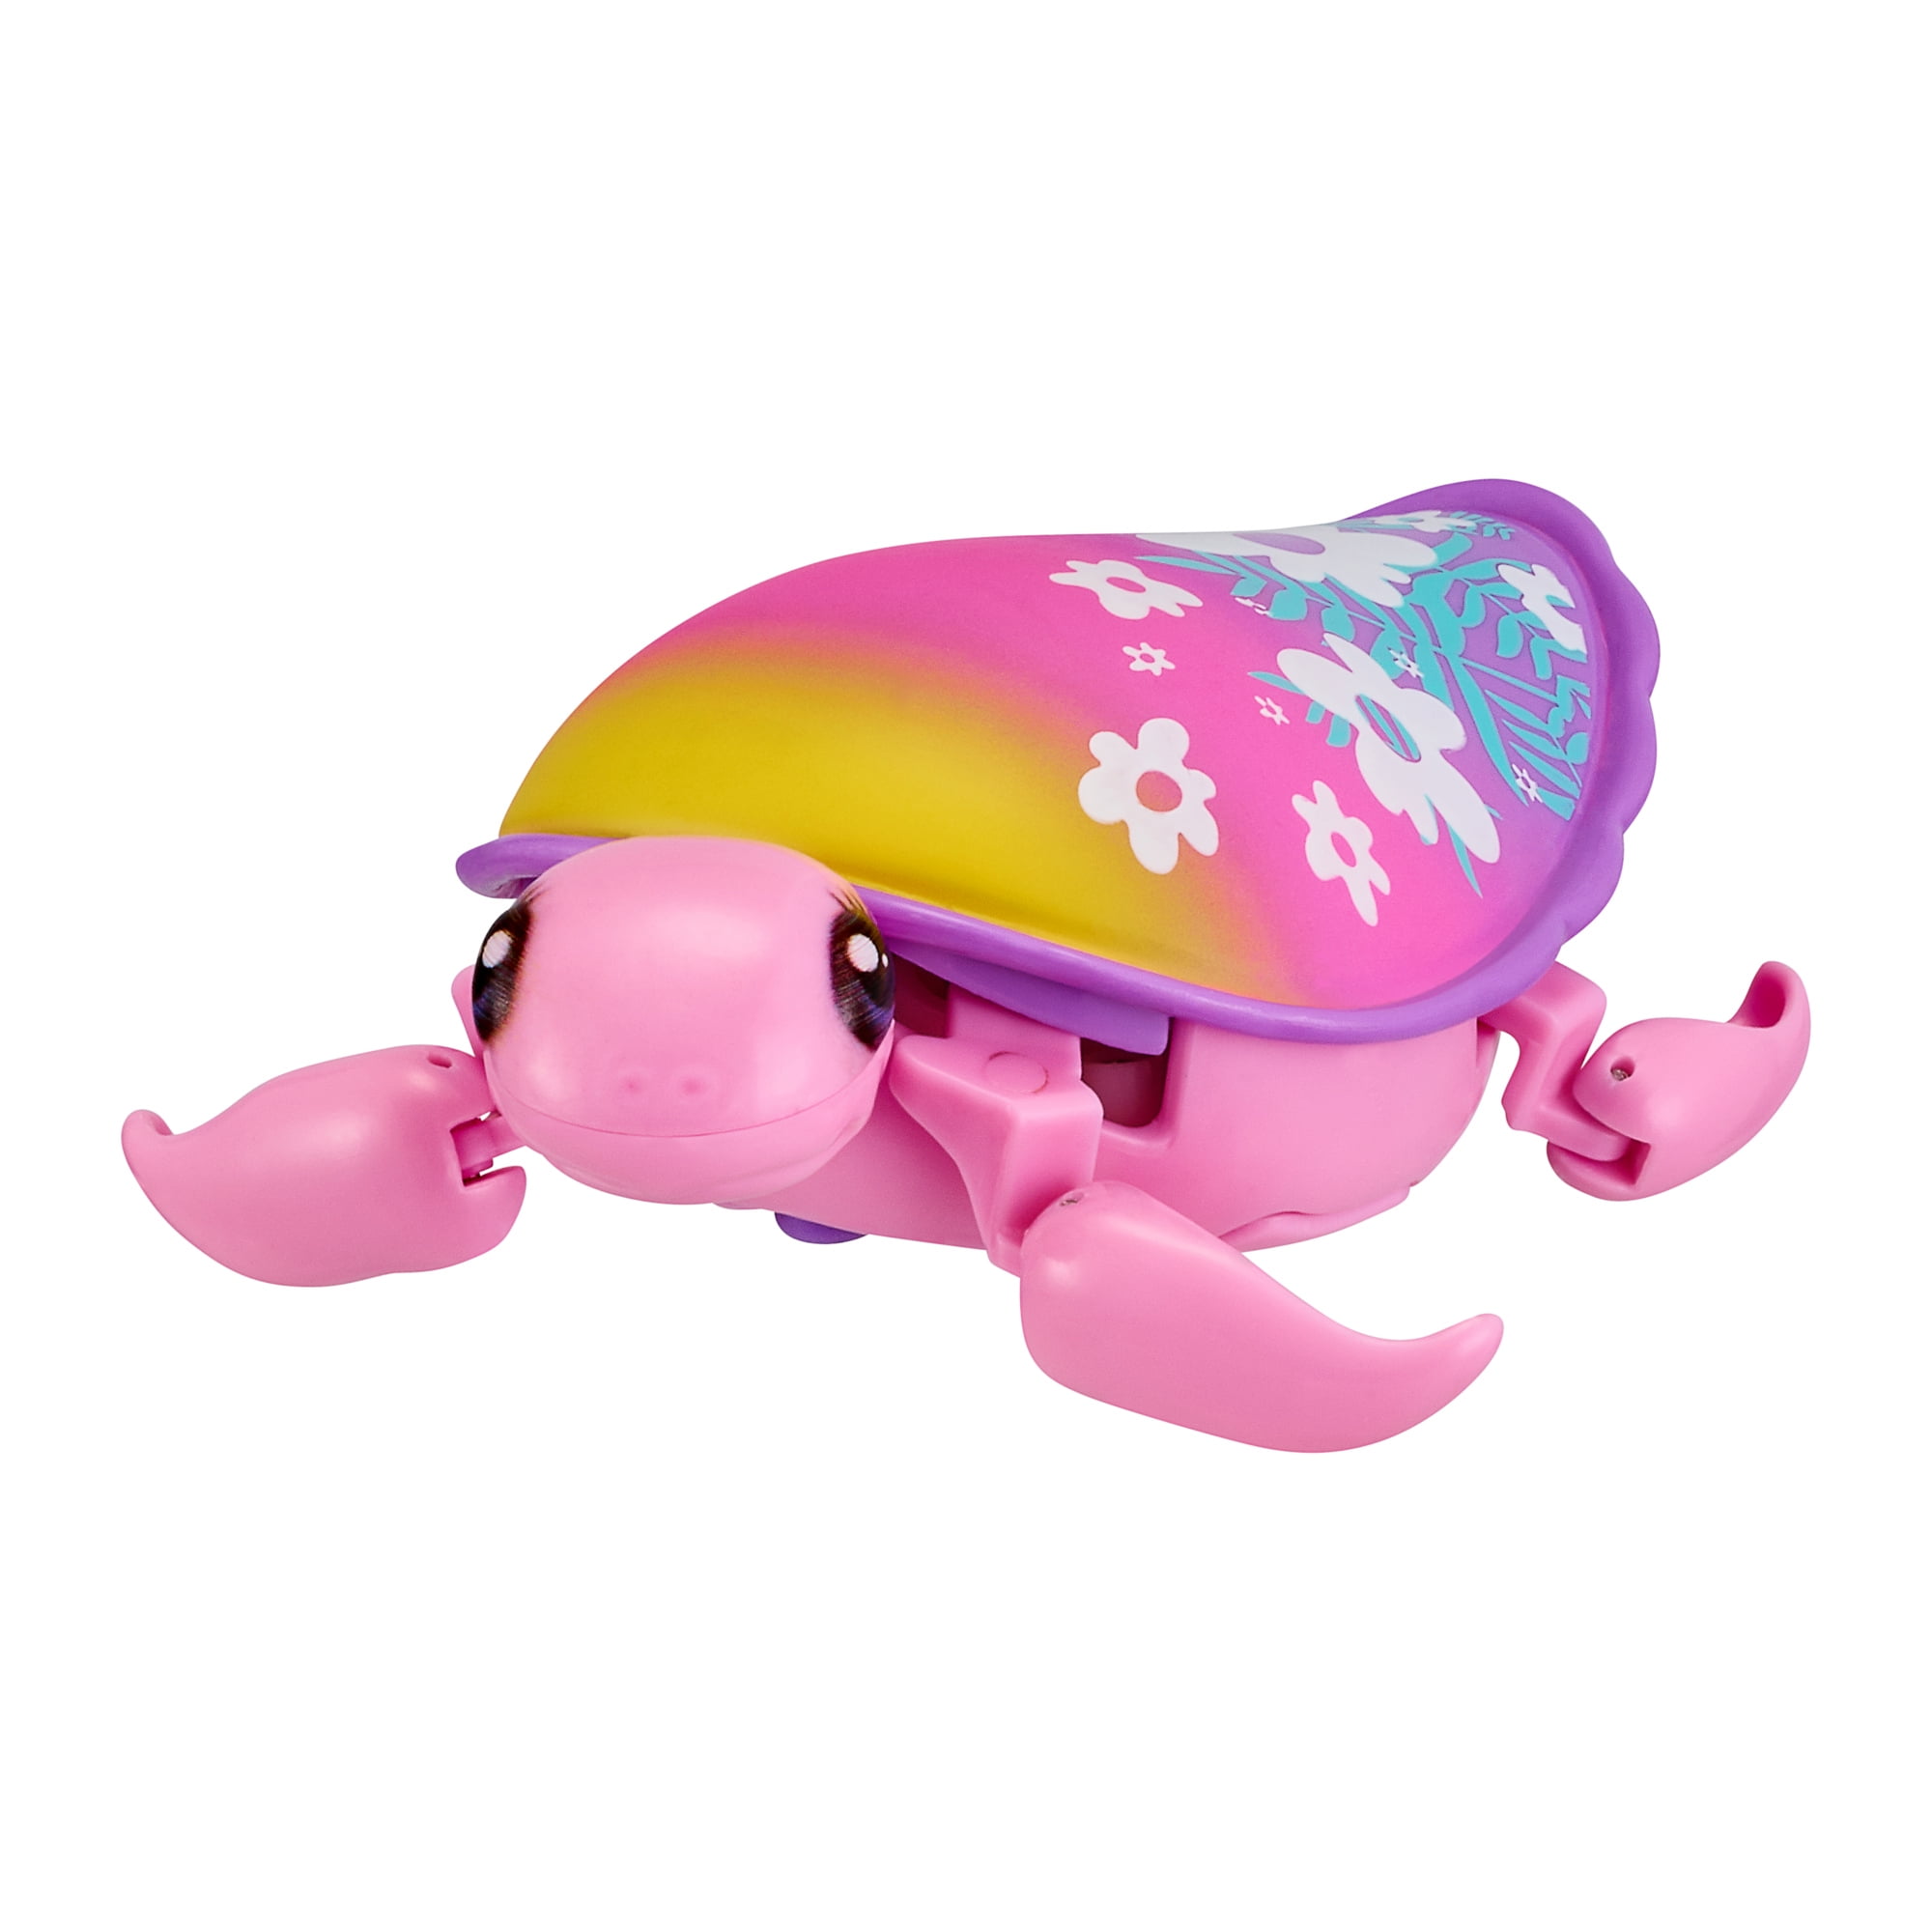 Little Live Pets, Lil' Turtle Beach Bloom, Interactive Toy Turtle That Swims In Water And Moves On Land, Ages 4+